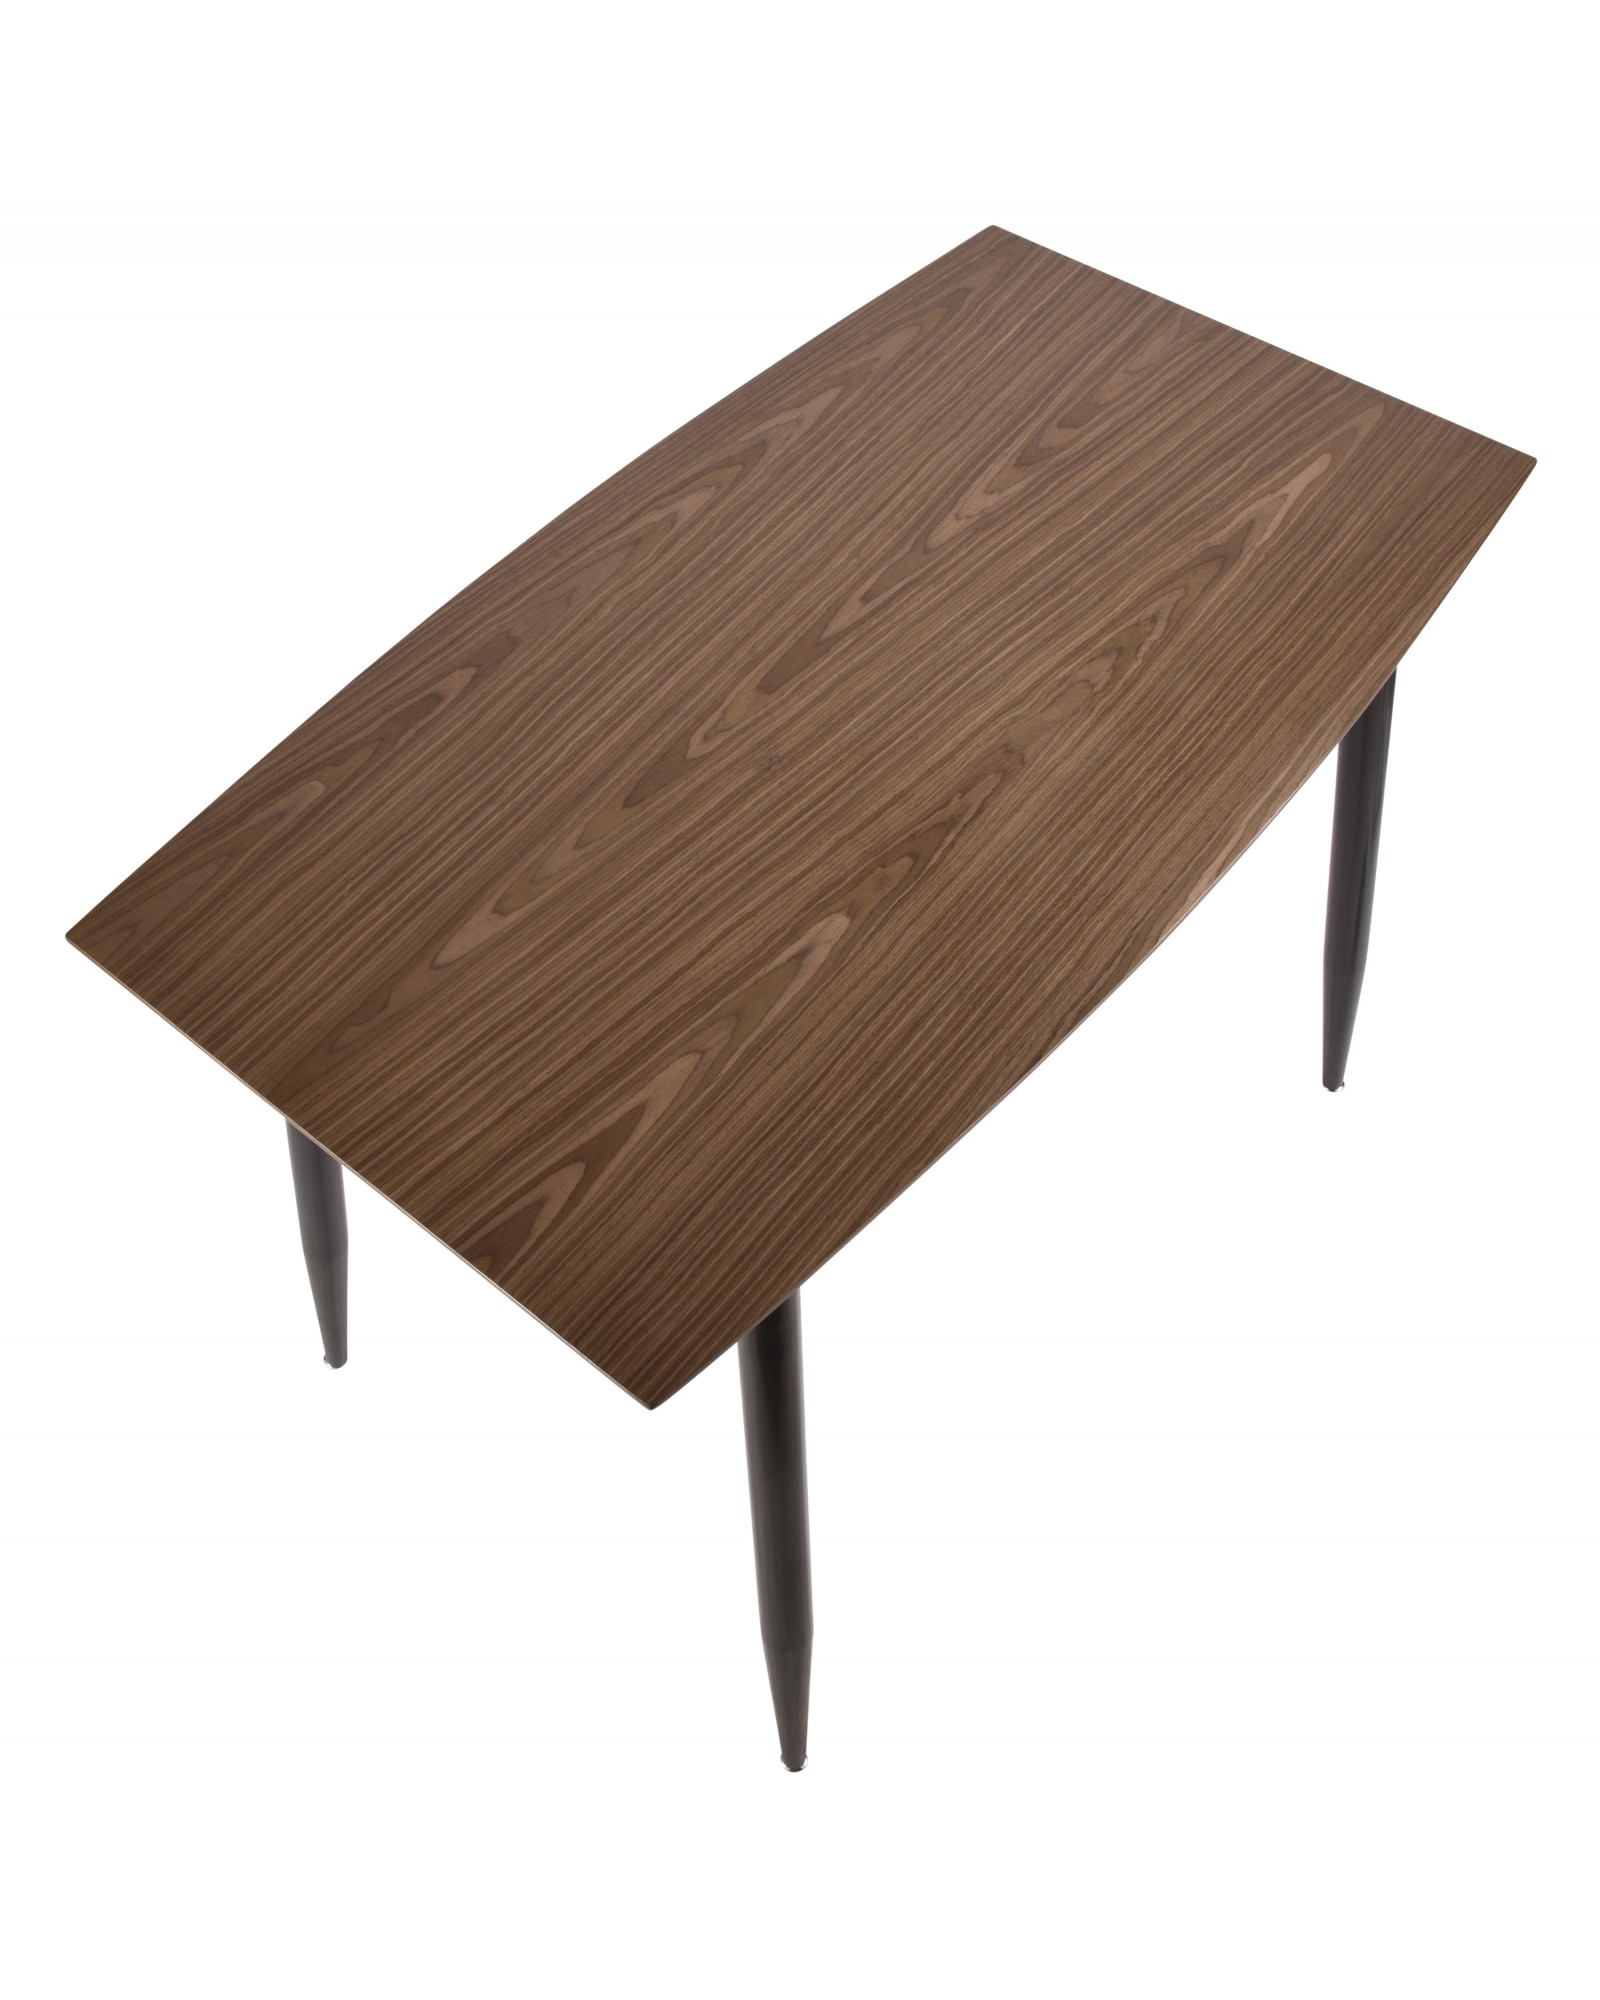 Clara Mid-Century Modern Counter Table with Black Metal Legs and Walnut Wood Top